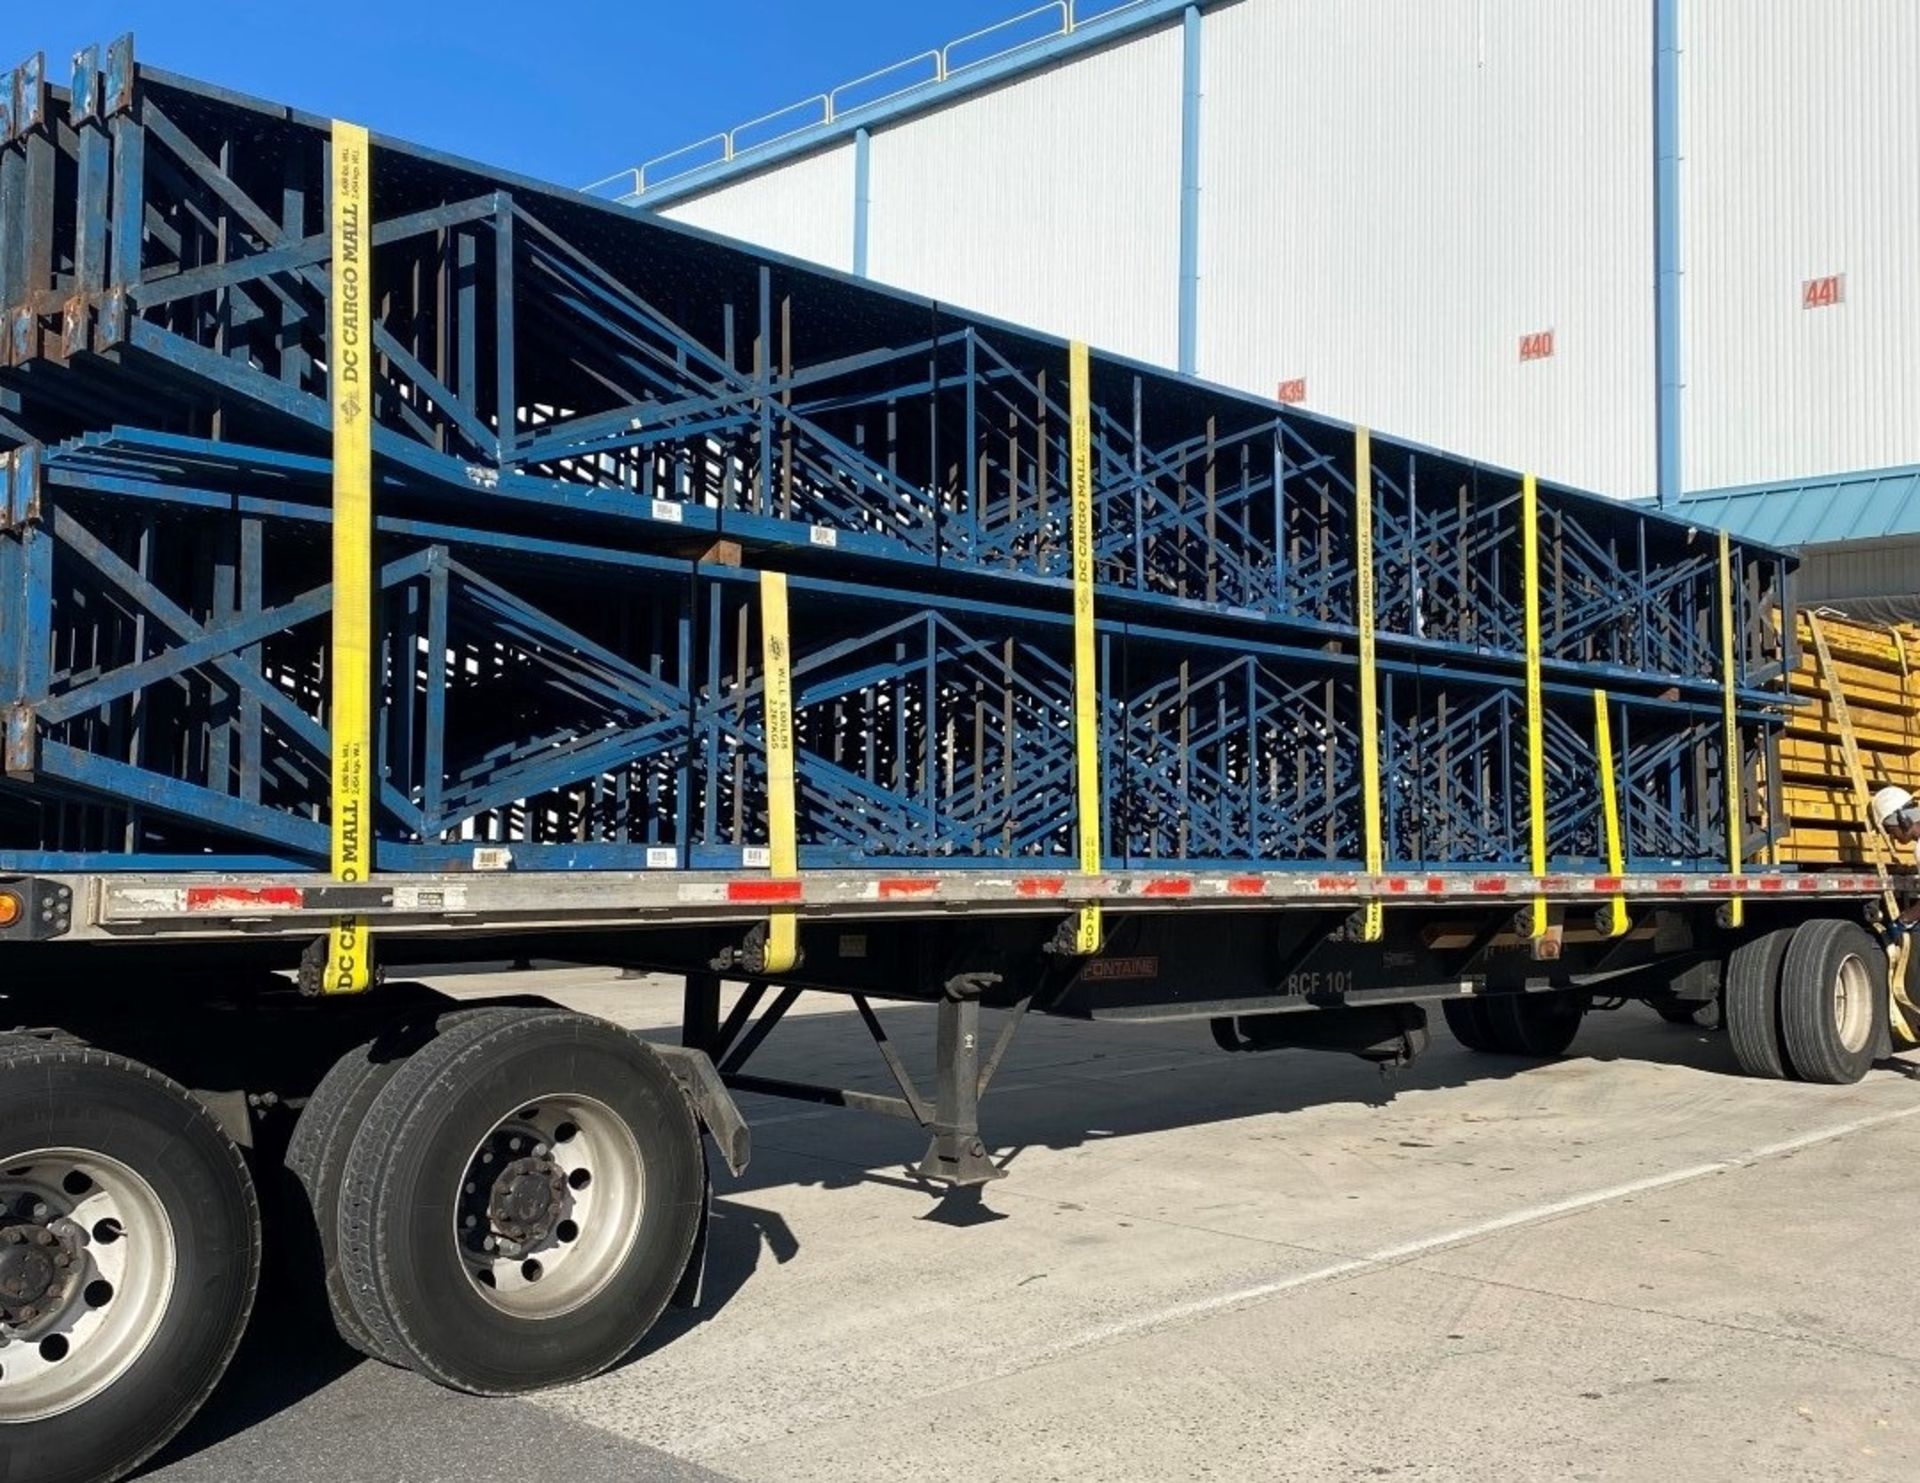 USED 15 PCS OF STRUCTURAL UPRIGHT. SIZE 30'H TO 33'H X 36"D, BLUE